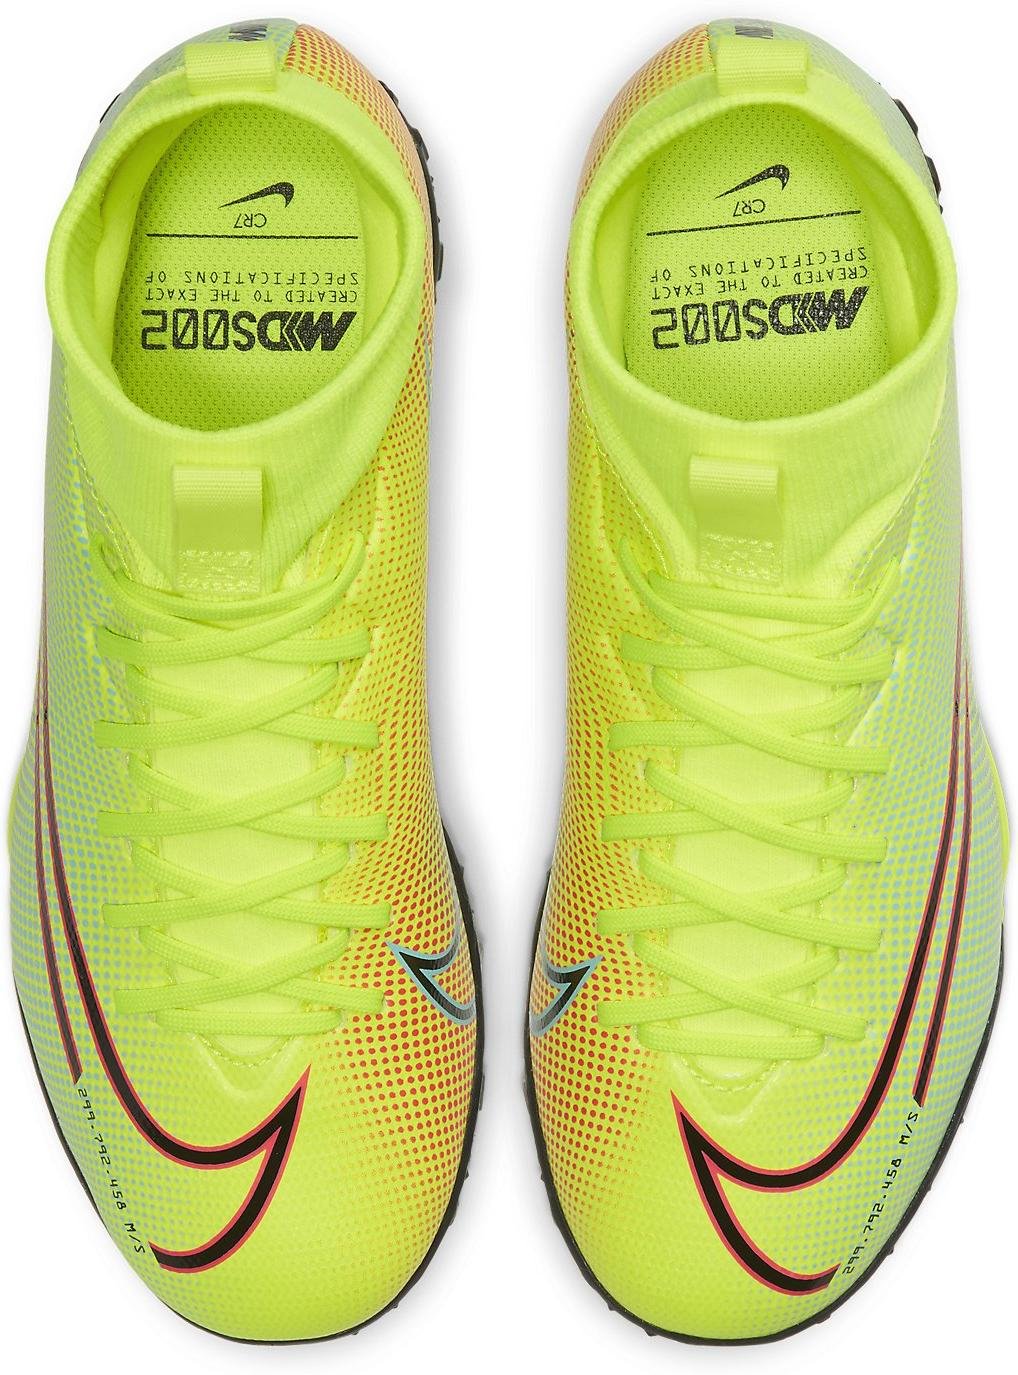 Nike SUPERFLY 7 ACADEMY FG MG Football Shoes For.